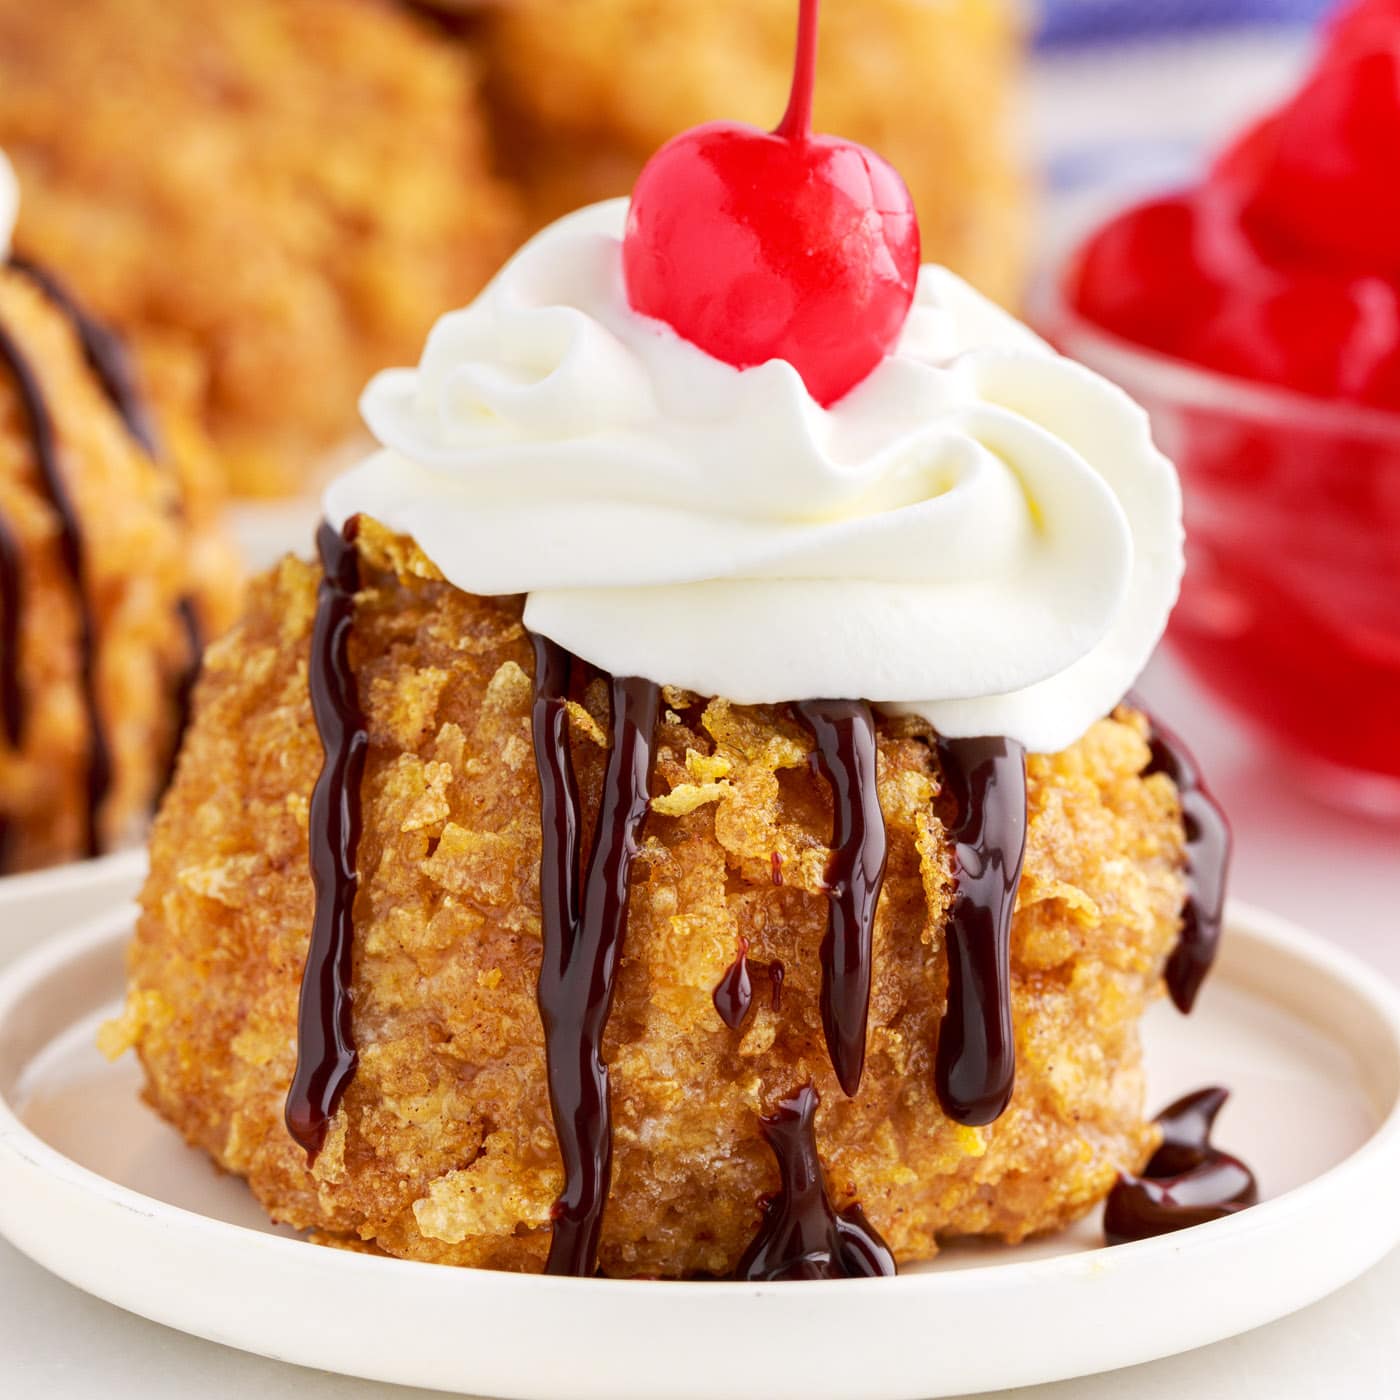 Check Out The *Super Interesting* Fried Chicken Ice Cream